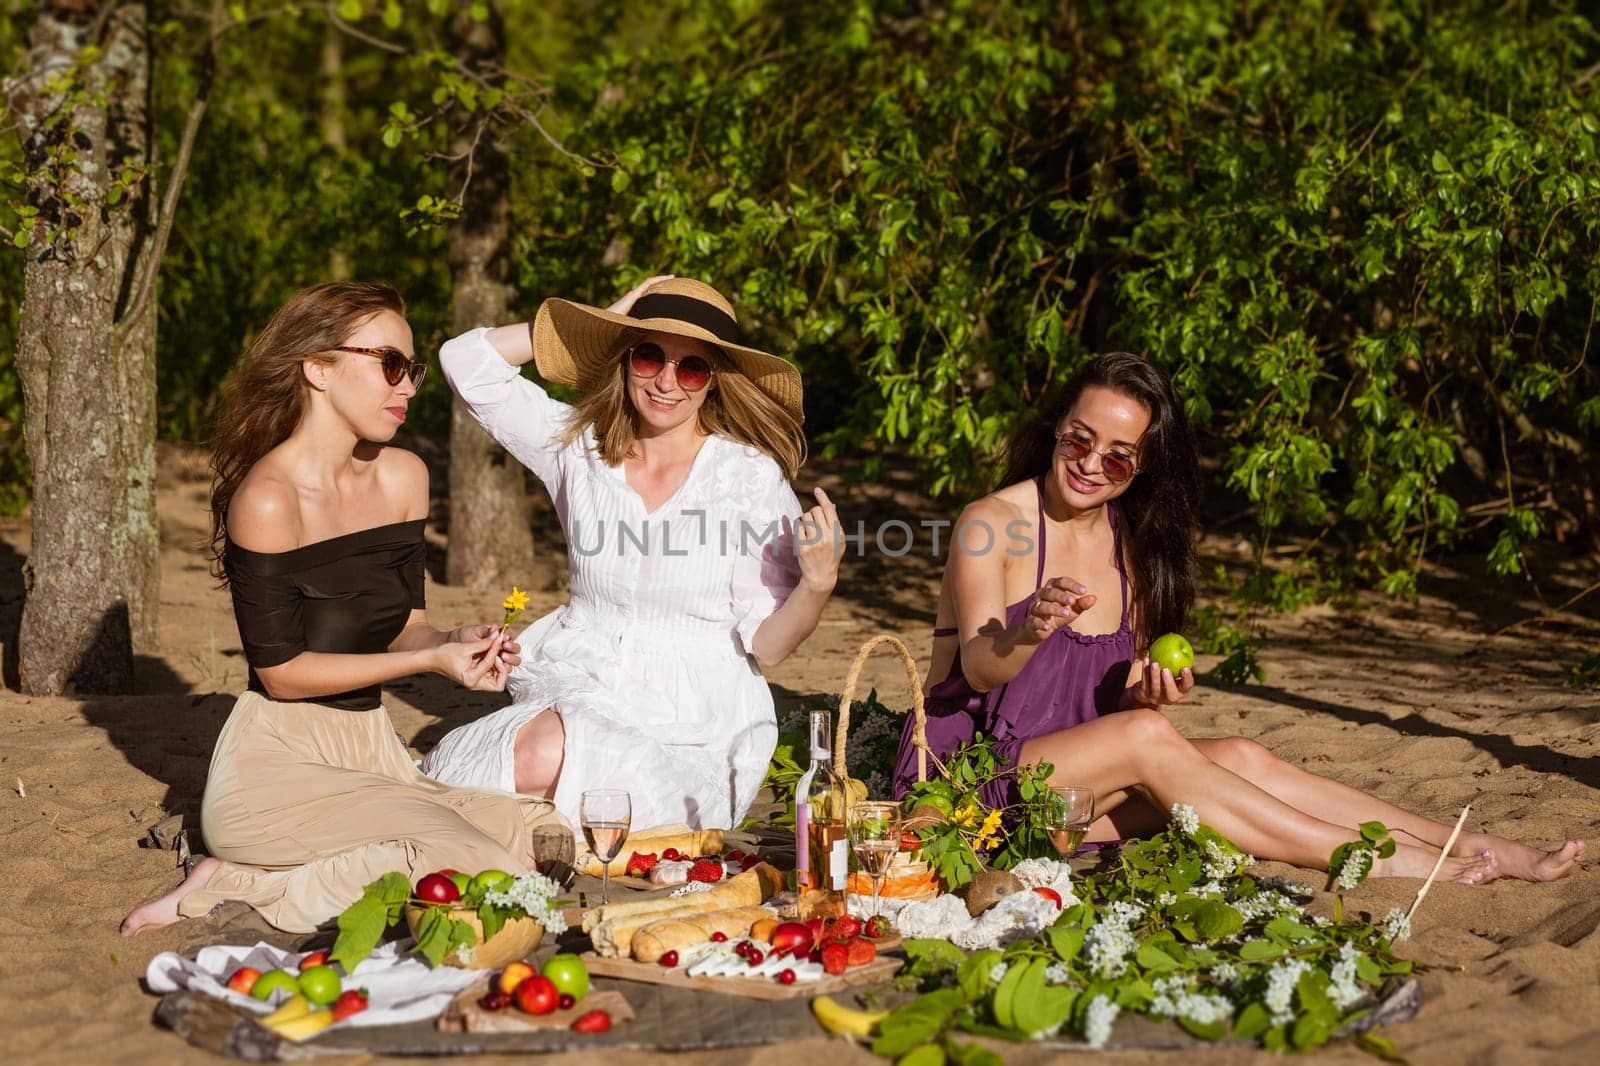 Cheerful women are resting in nature with wine. Beautiful woman in sunglasses are having fun on picnic on beach. Girlfriends drink wine and eat fresh fruit. Stylish in dresses on vacation on sunny day